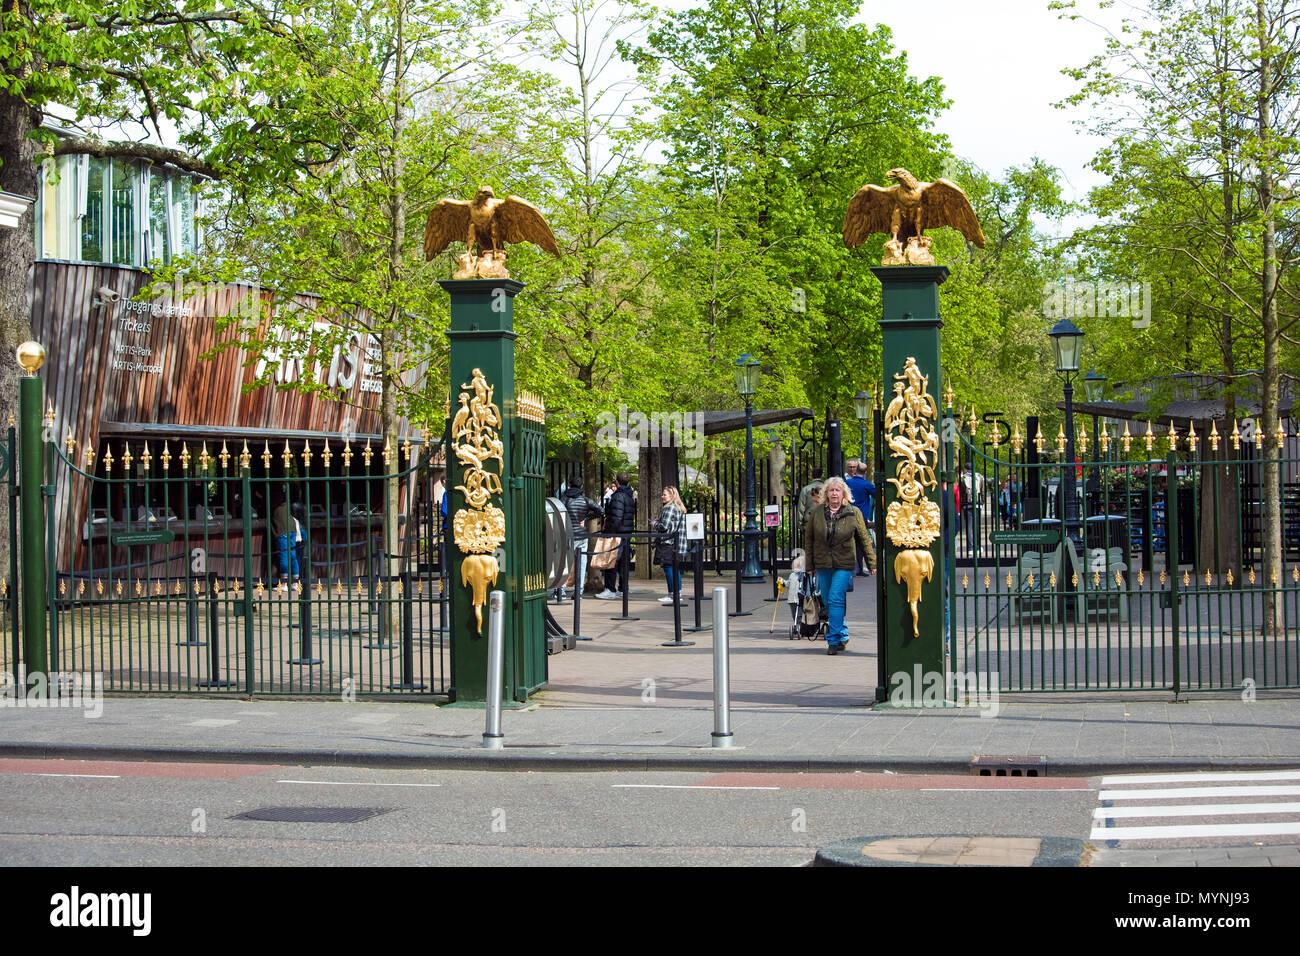 Entrance to the Amsterdam Zoo, Nethrelands Stock Photo